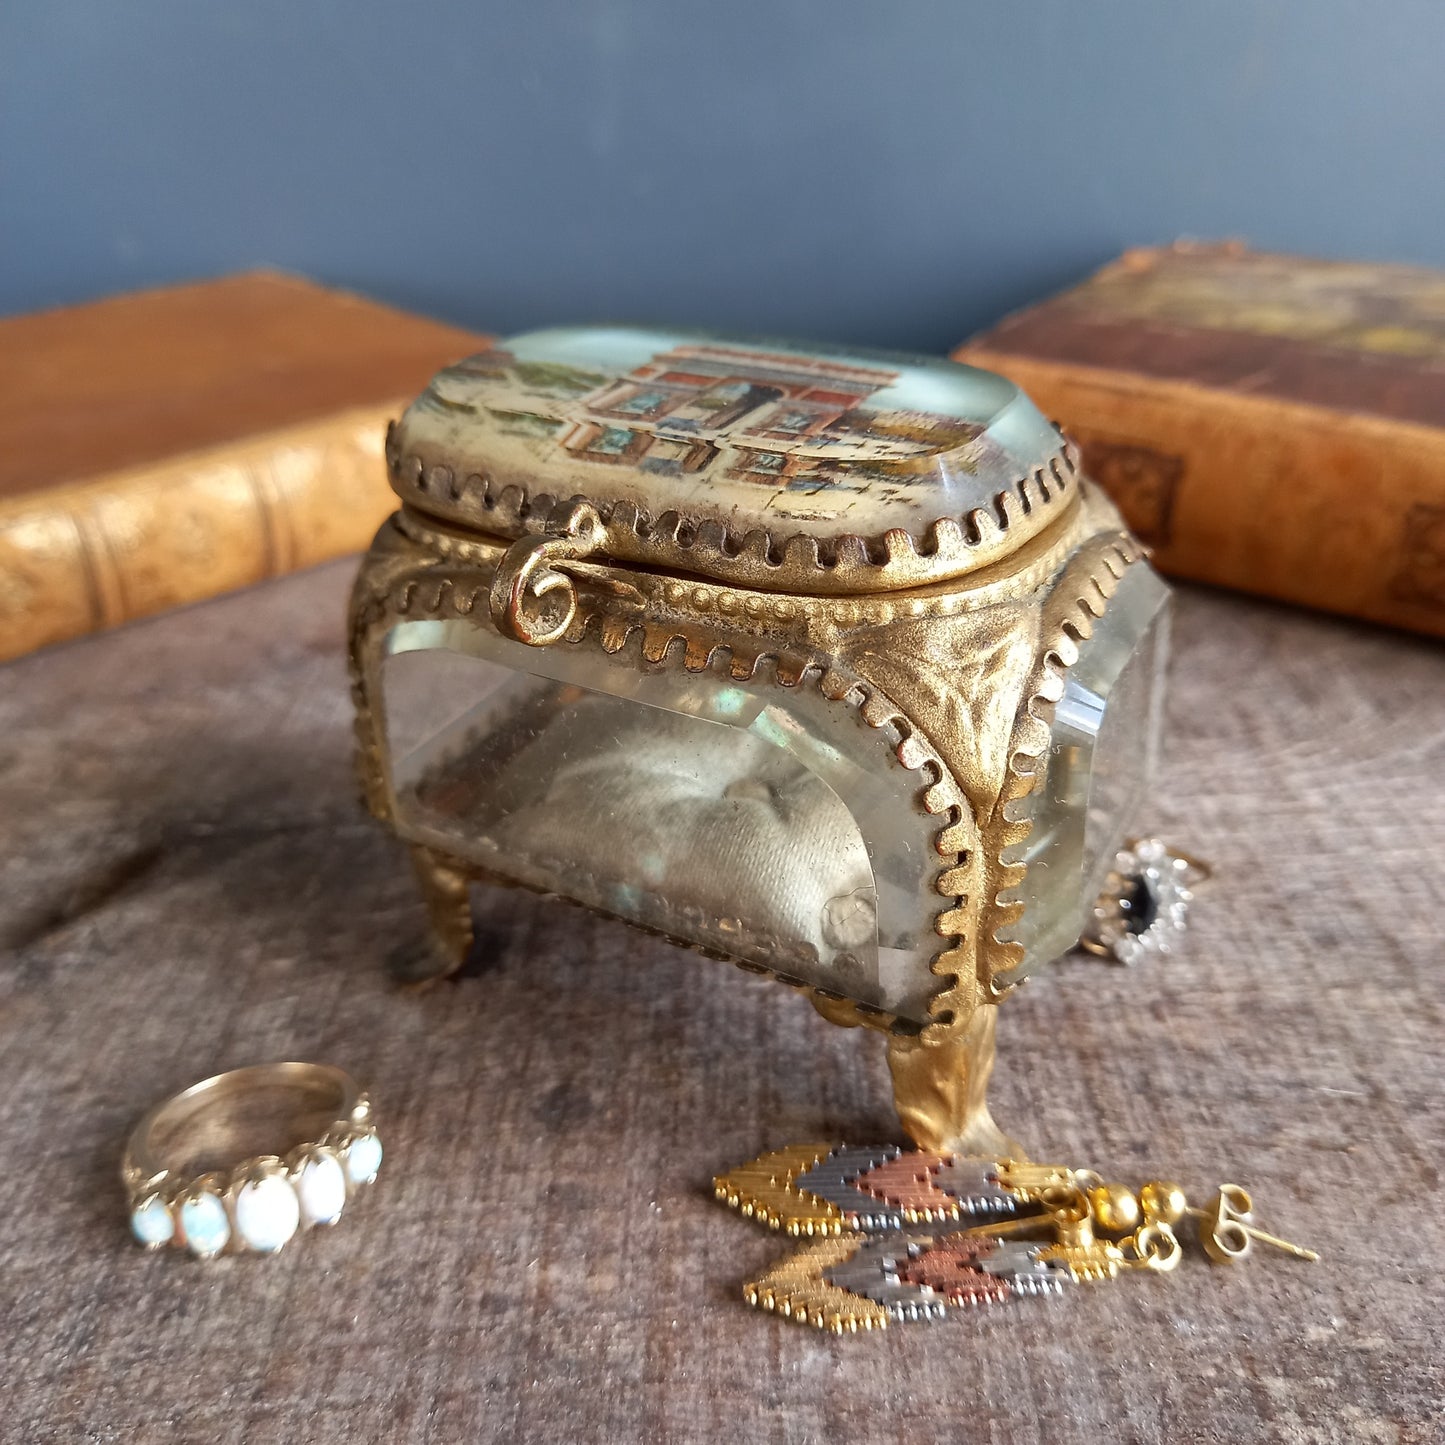 French antique jewellery or trinket box.